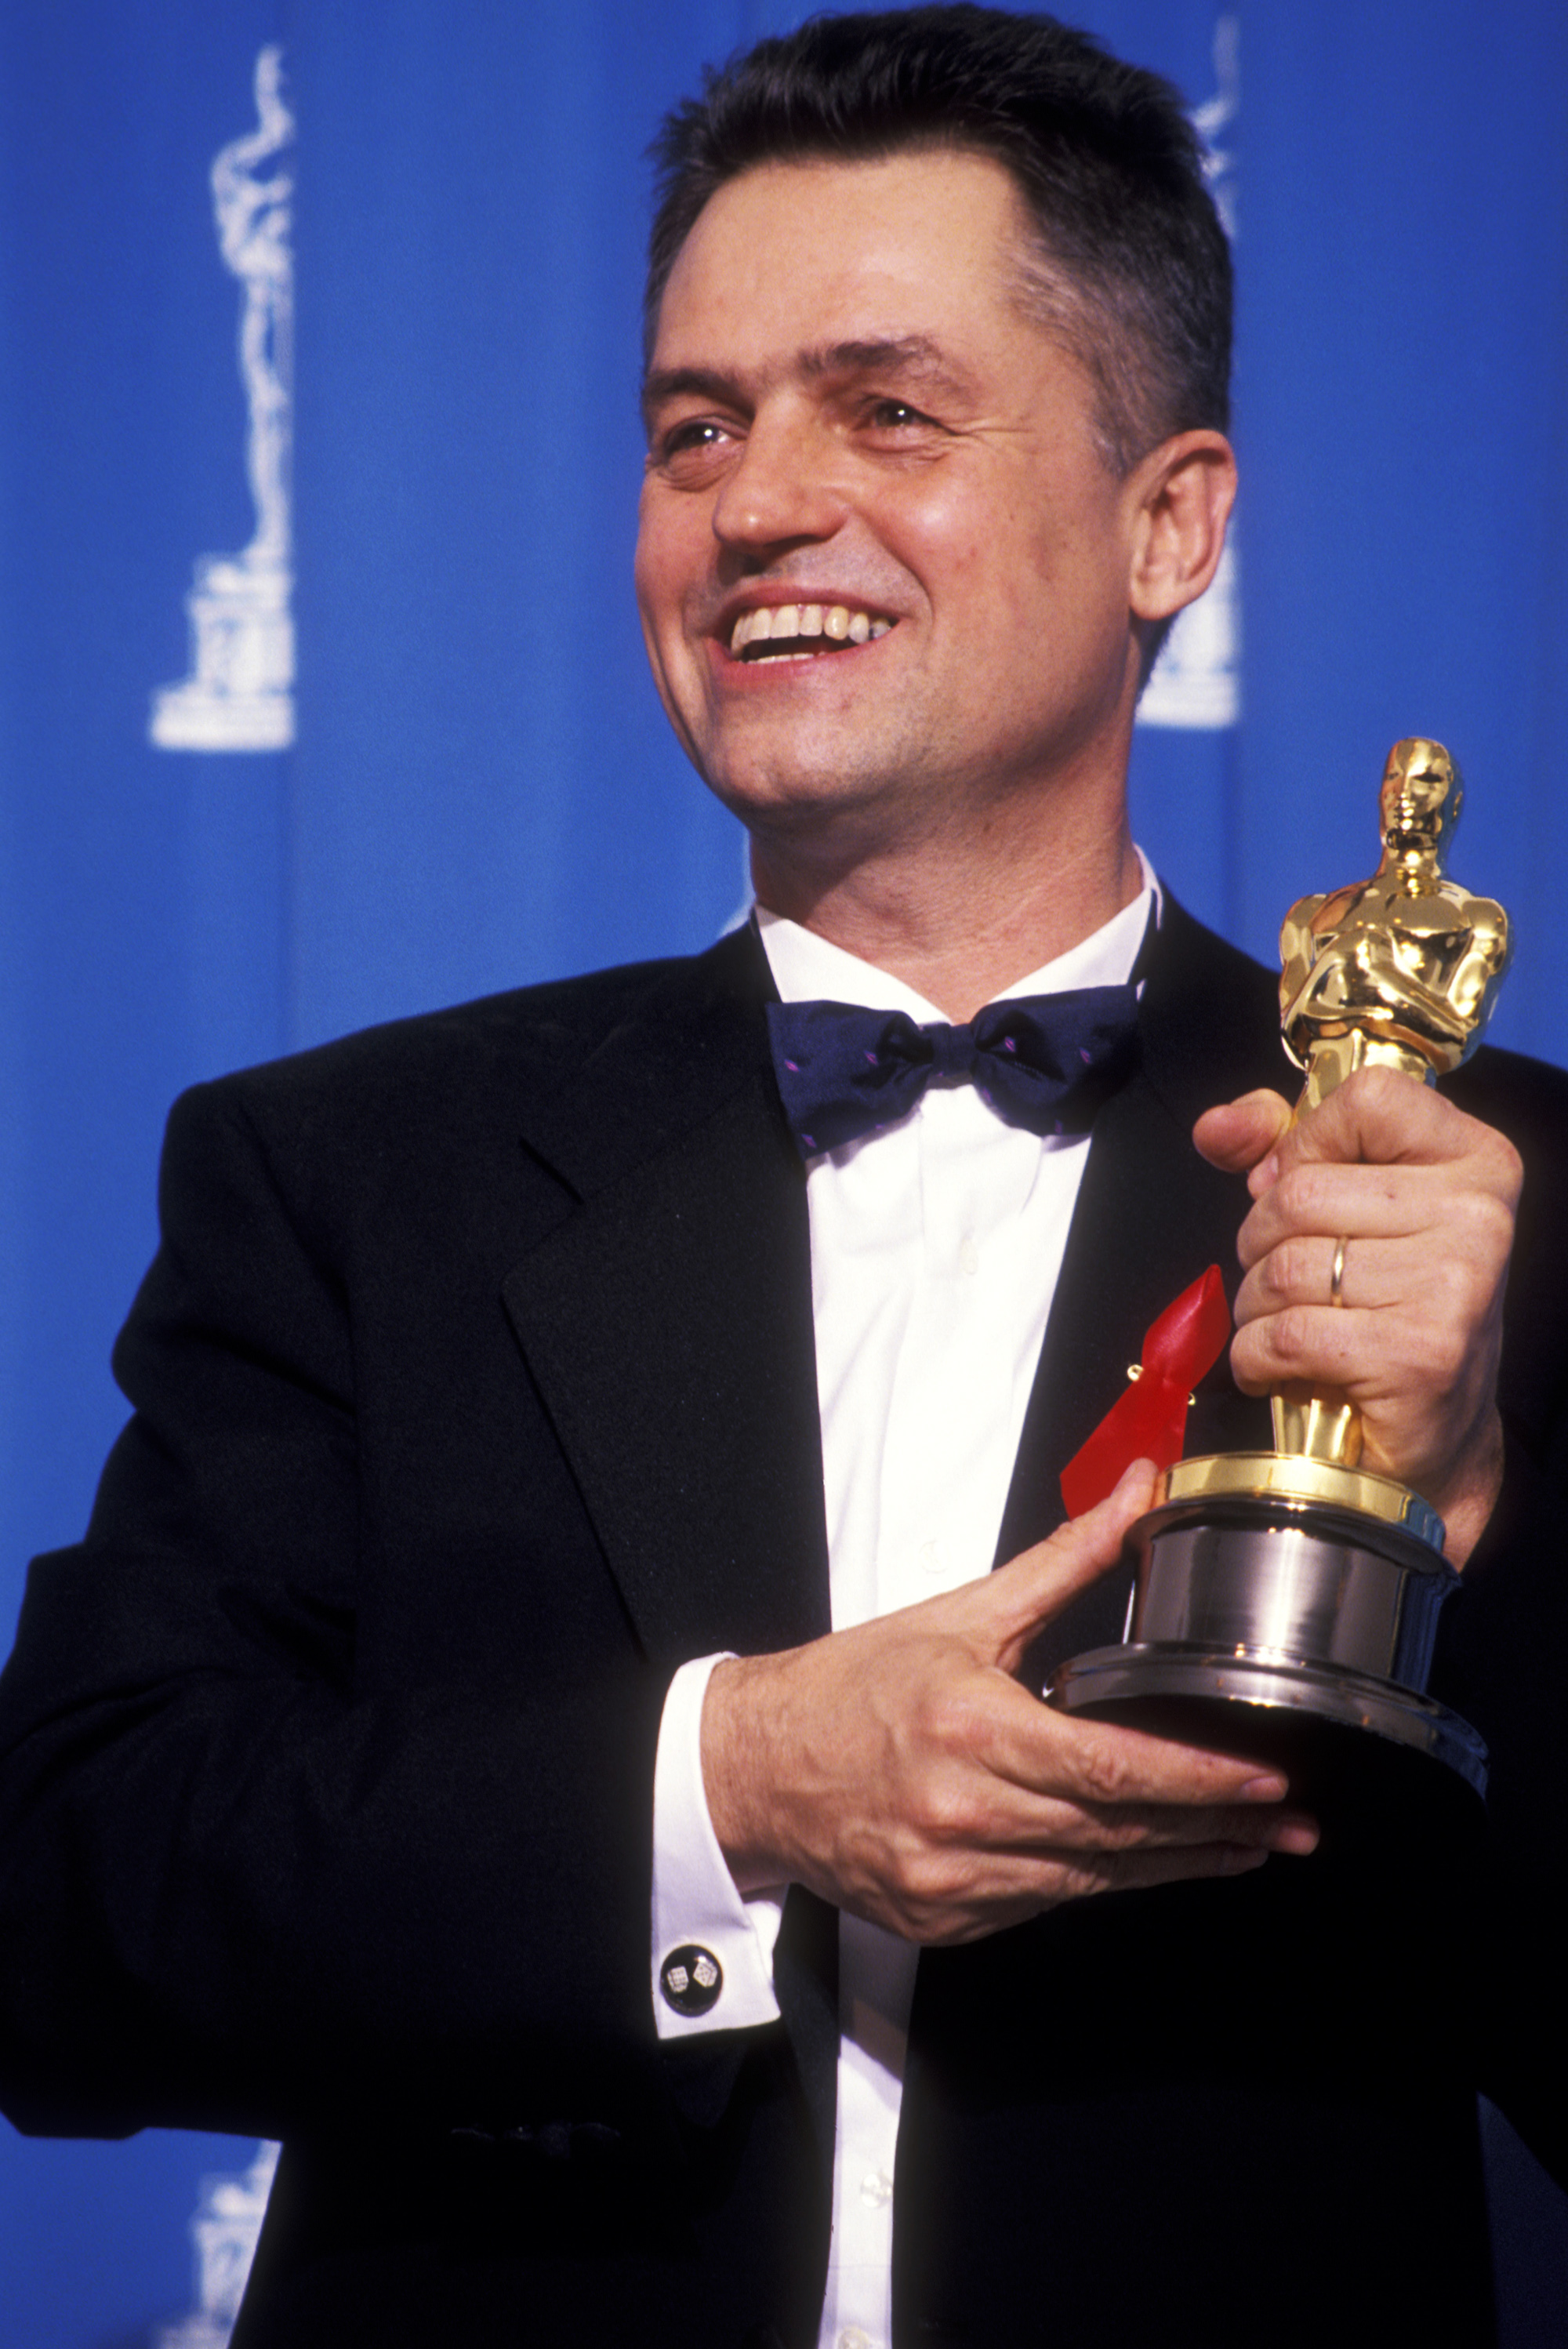 Jonathan Demme attends the 64th Annual Academy Awards in Los Angeles, on March 30, 1992. (Ron Galella—Getty Images)